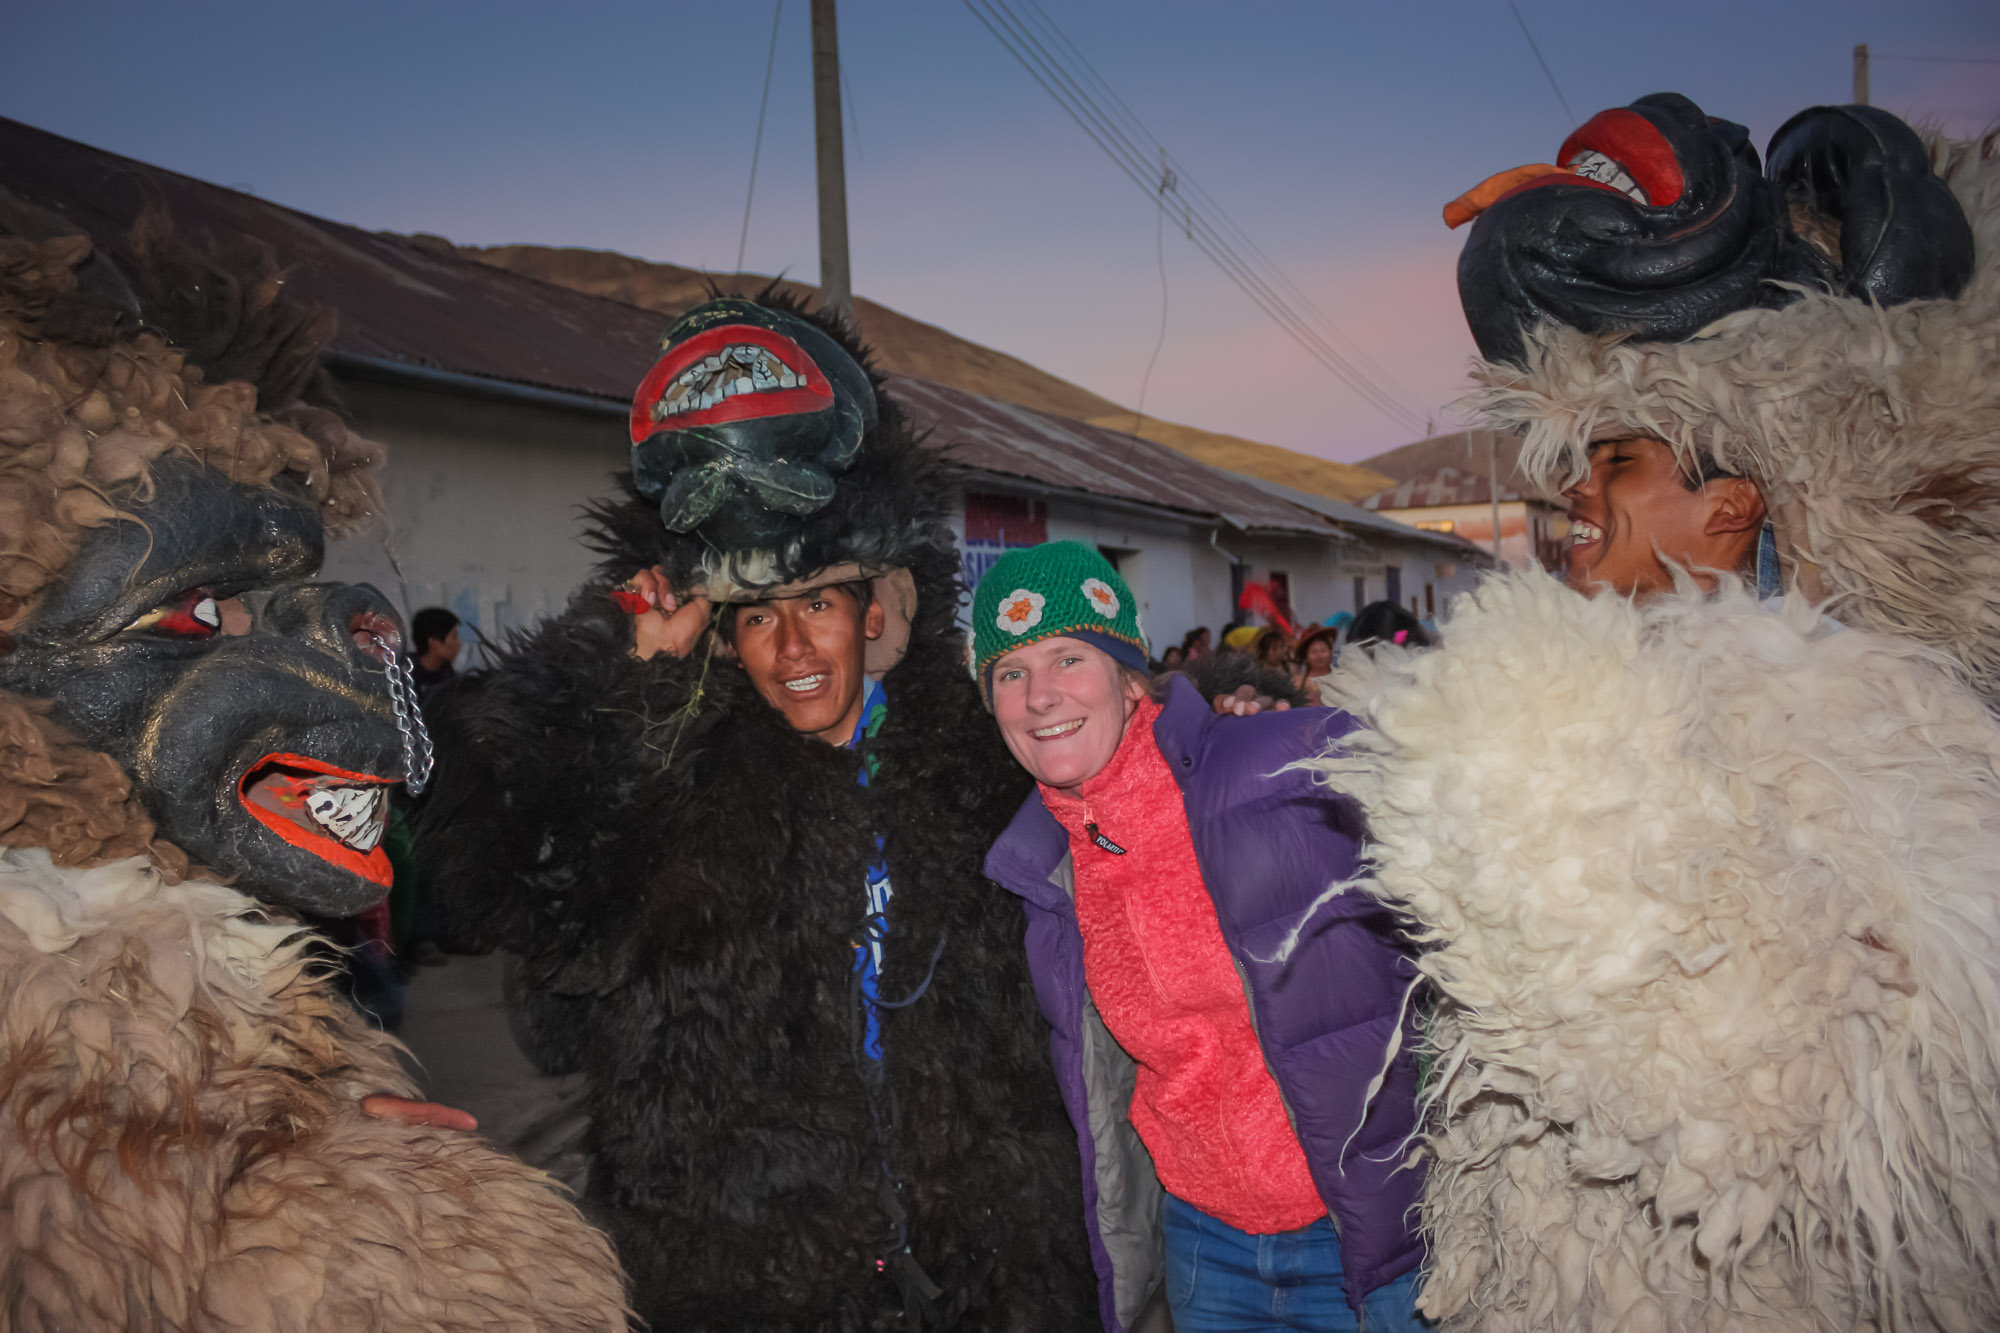 Guest on one of our Peru adventure tours embraced by three locals dressed as bears